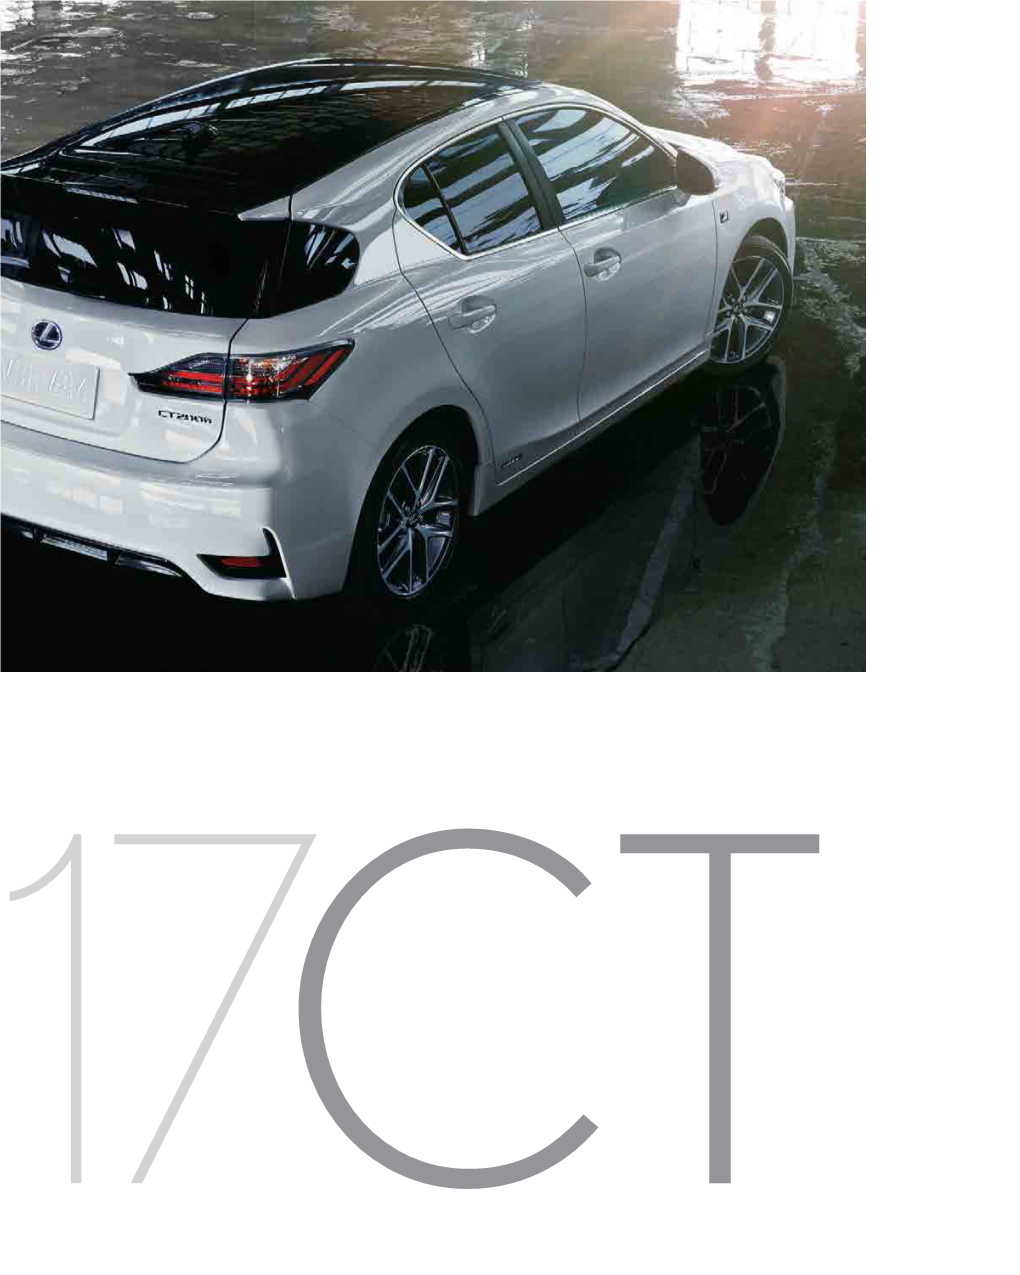 2017 Lexus CT 200H and CT 200H F Sport Brochure